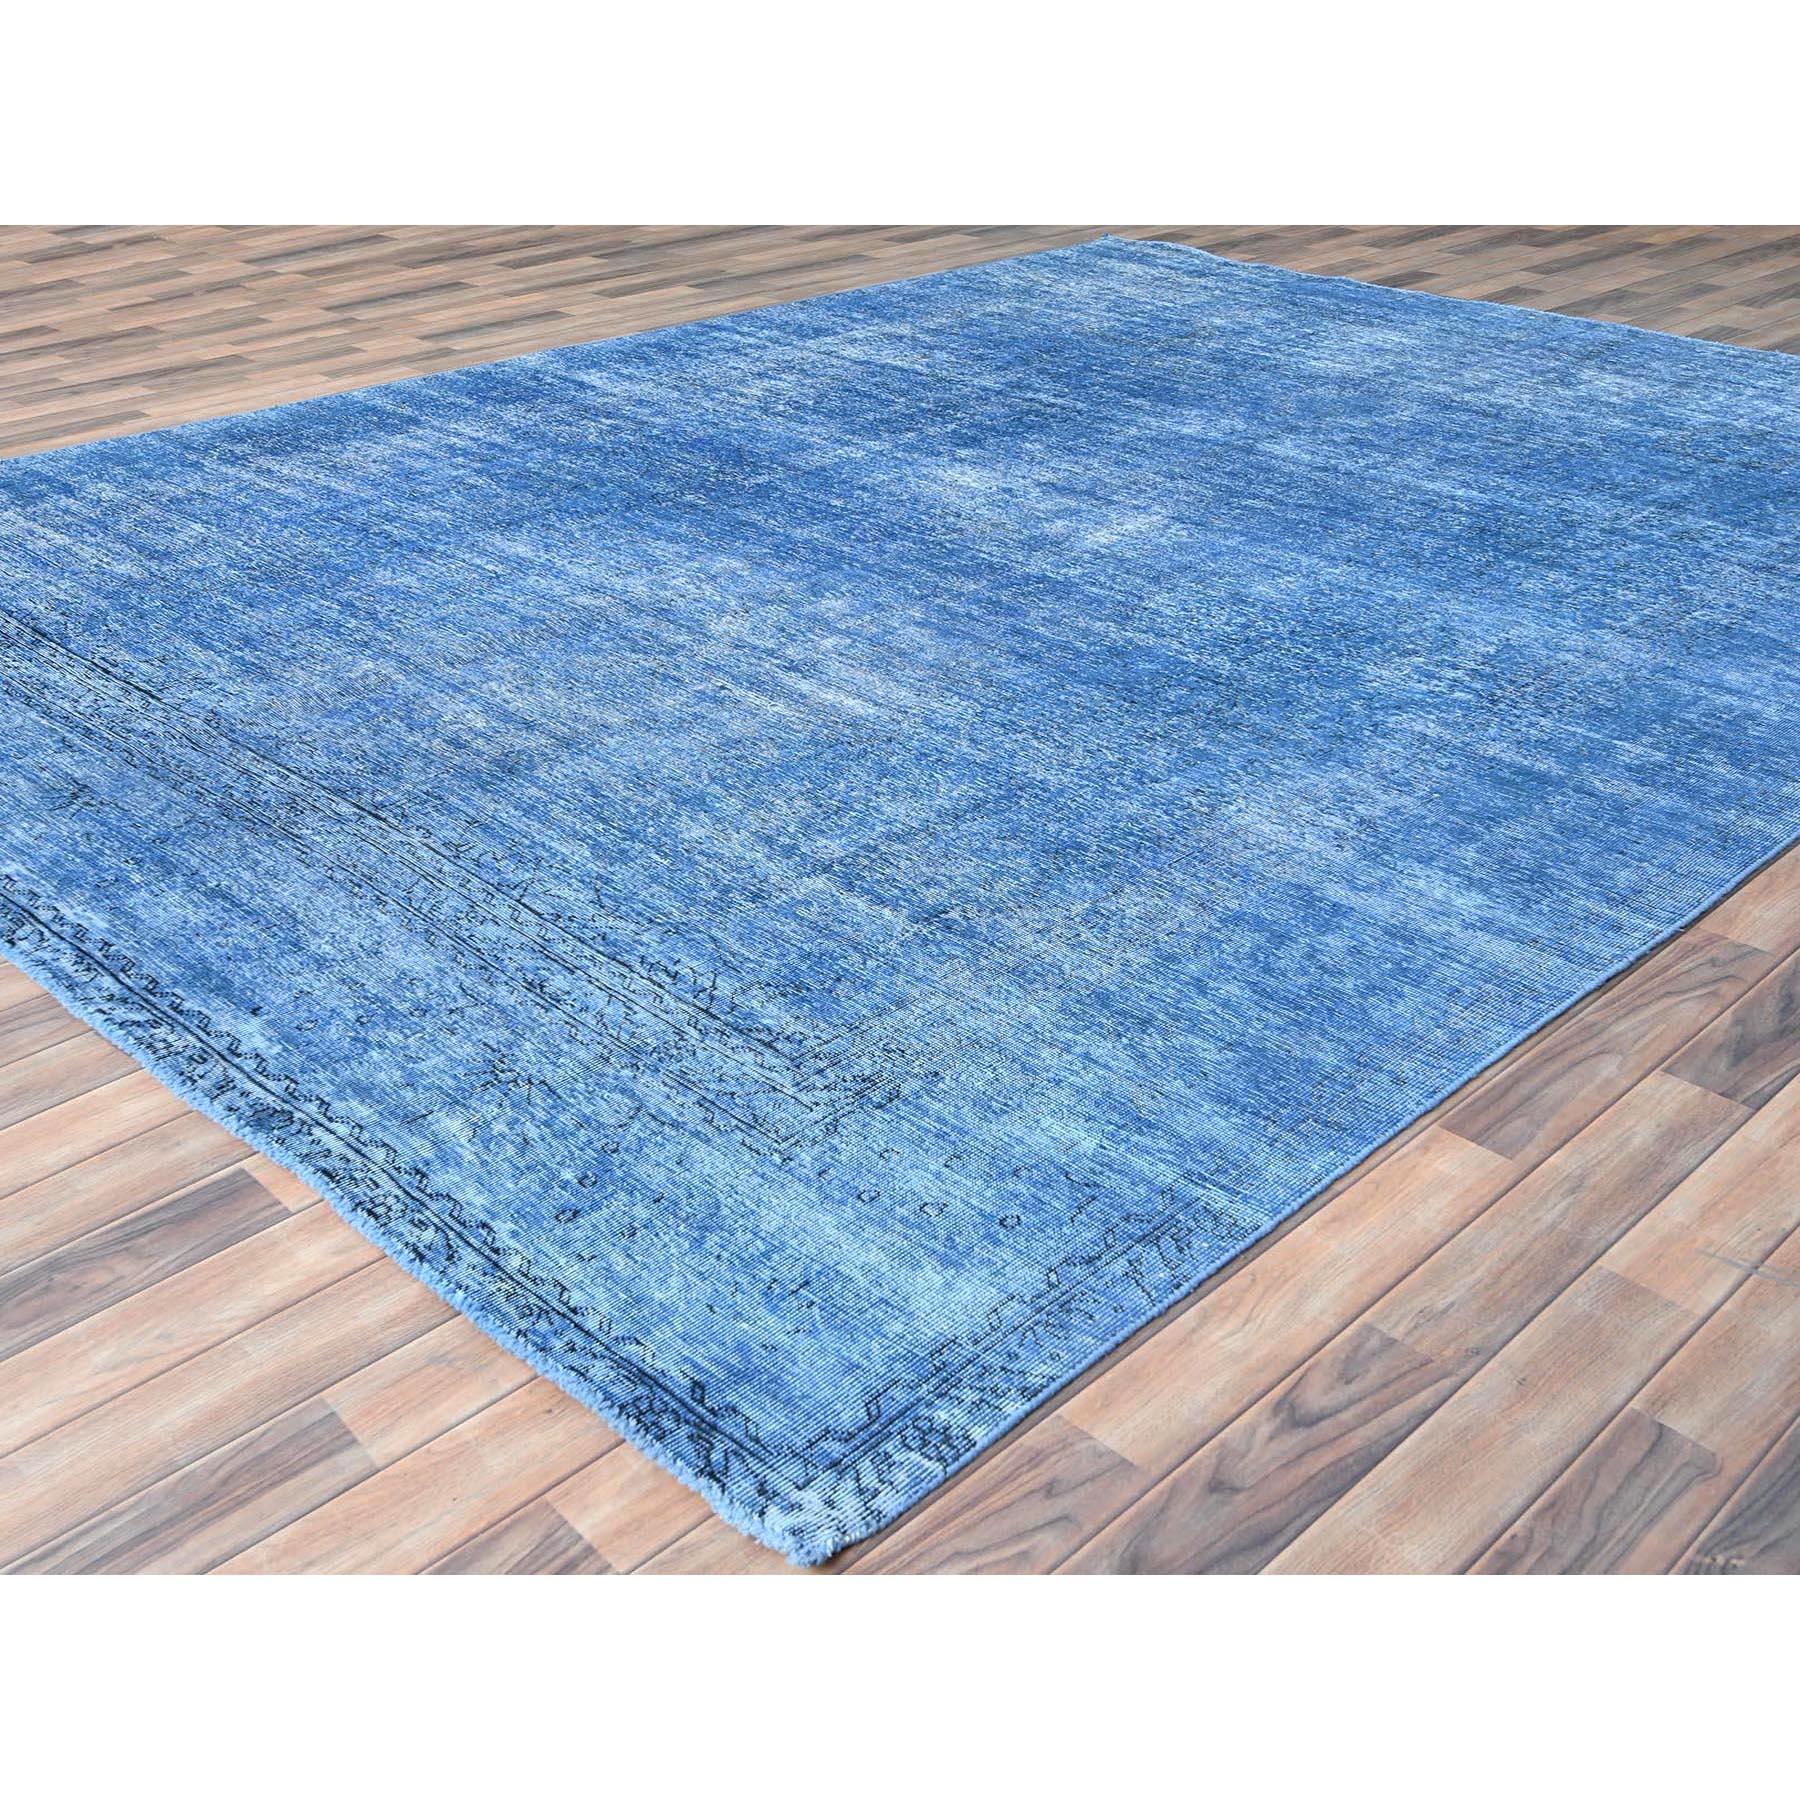 Medieval Denim Blue Old Persian Tabriz Worn Down Rustic Look Worn Wool Hand Knotted Rug For Sale